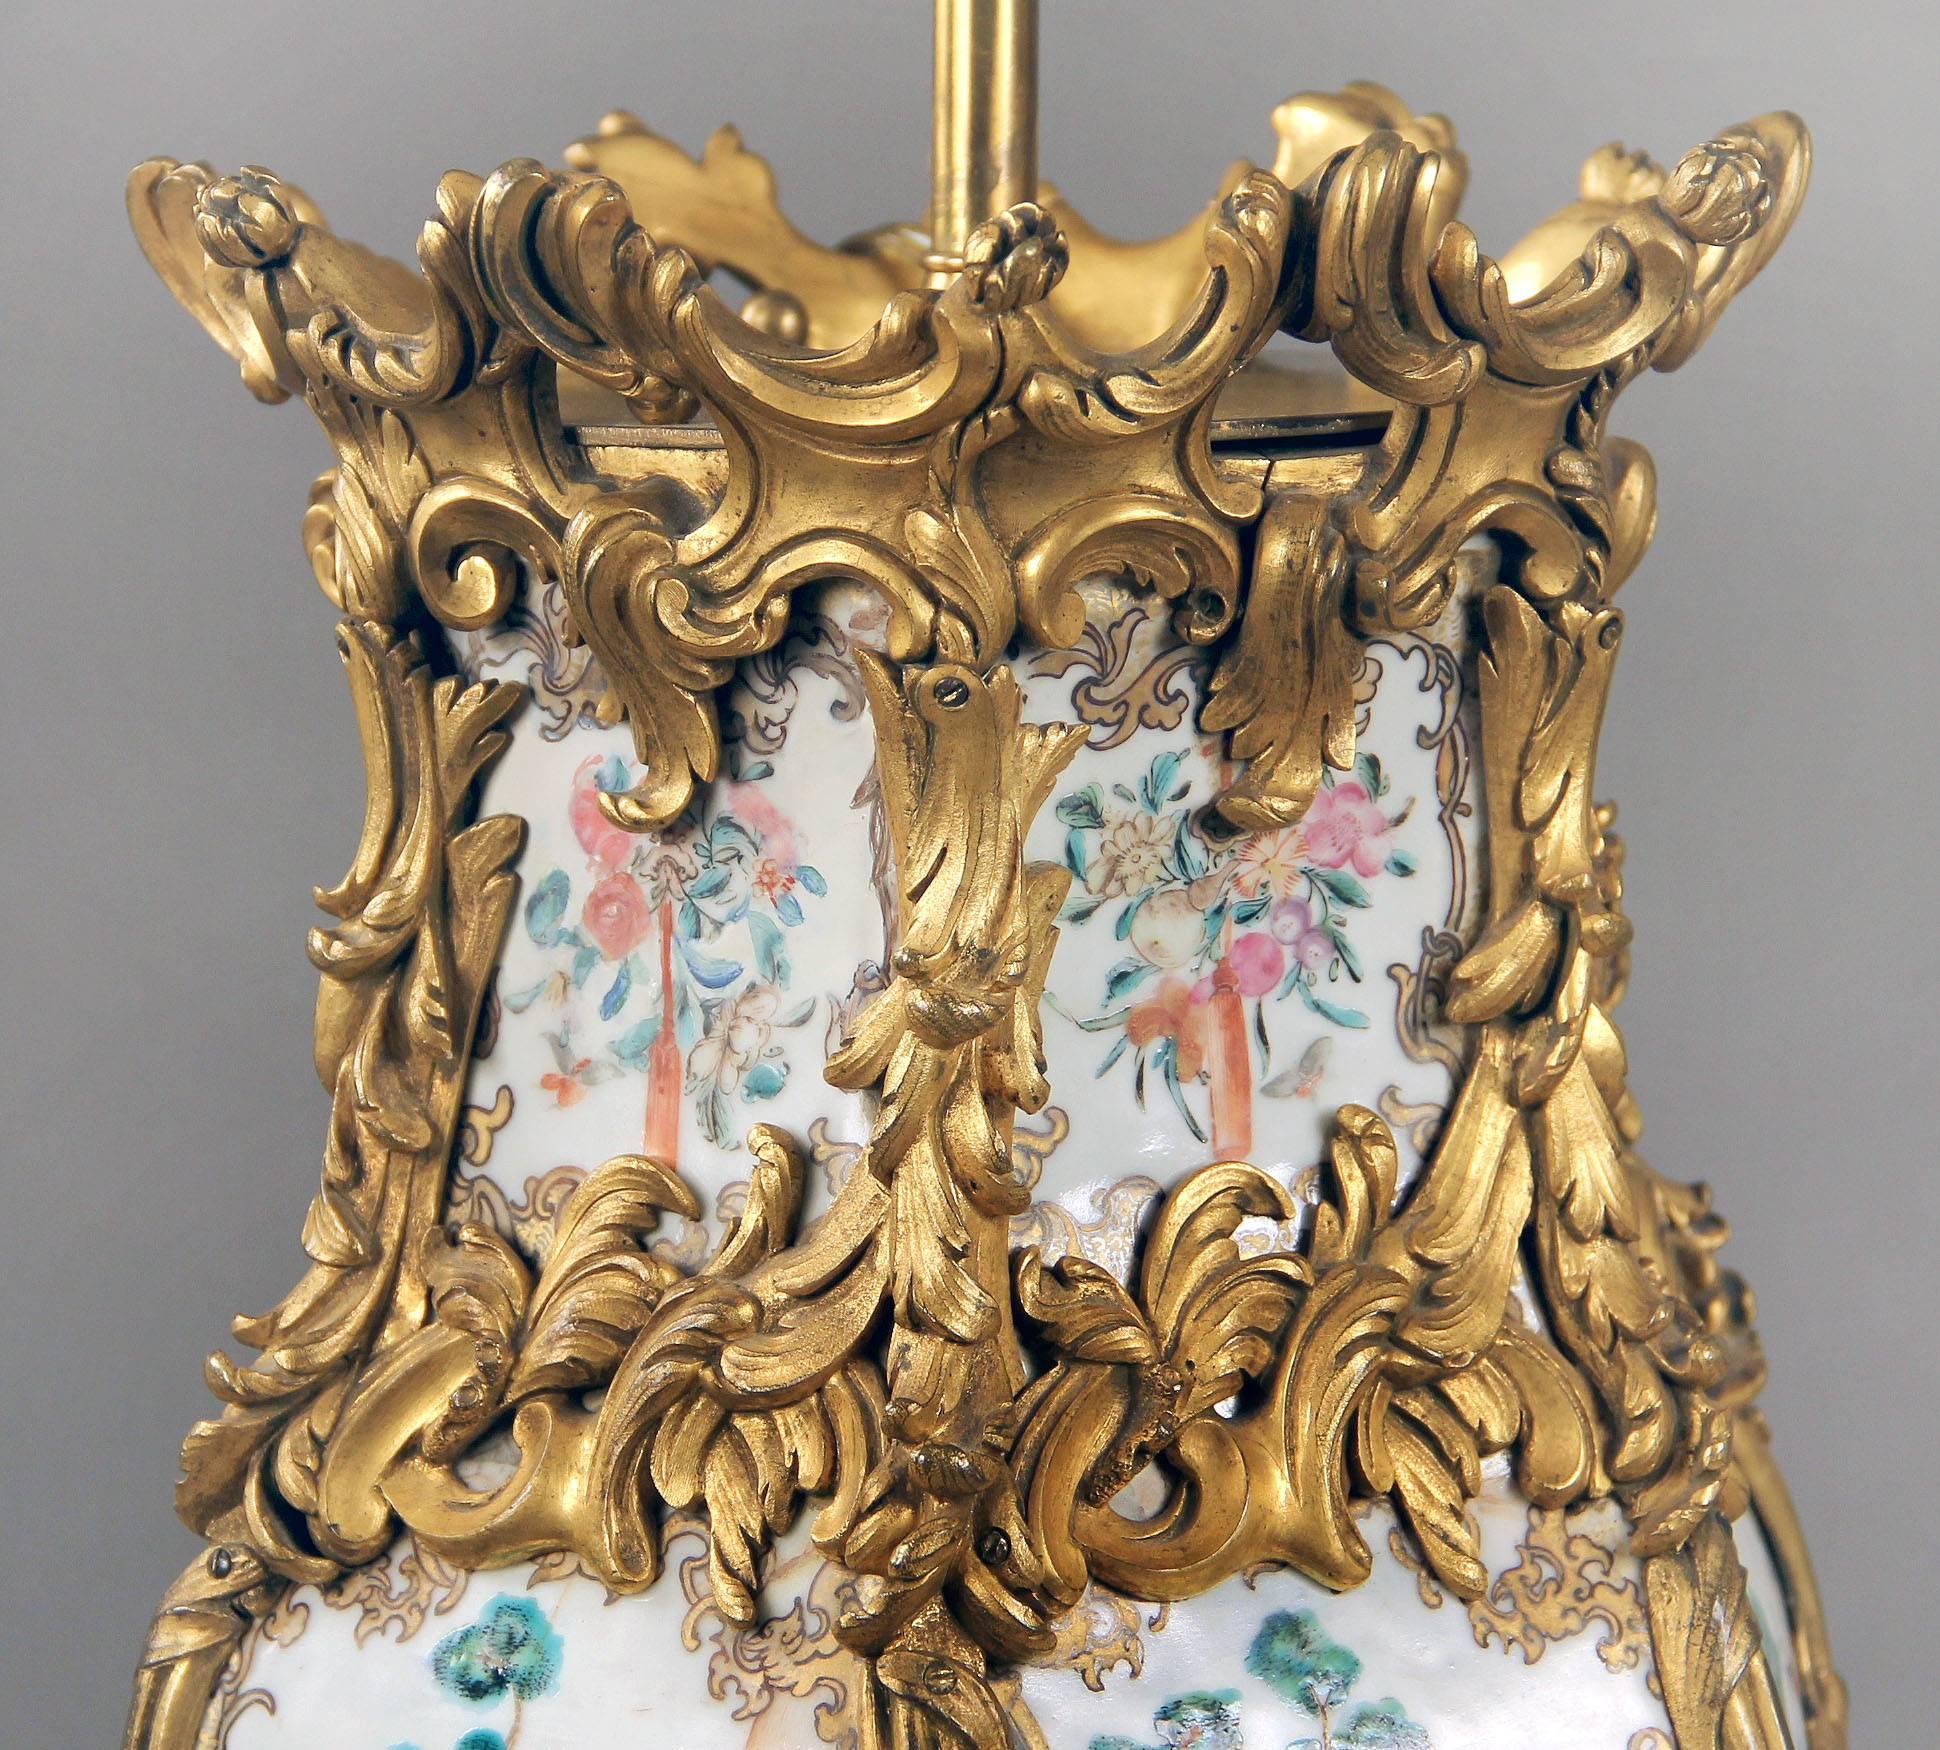 A nice quality pair of late 19th century French gilt bronze mounted Chinese porcelain lamps.

Fine bronze mounts separate the six painted panels decorated with chinoiserie figures in landscape and domestic scenes.